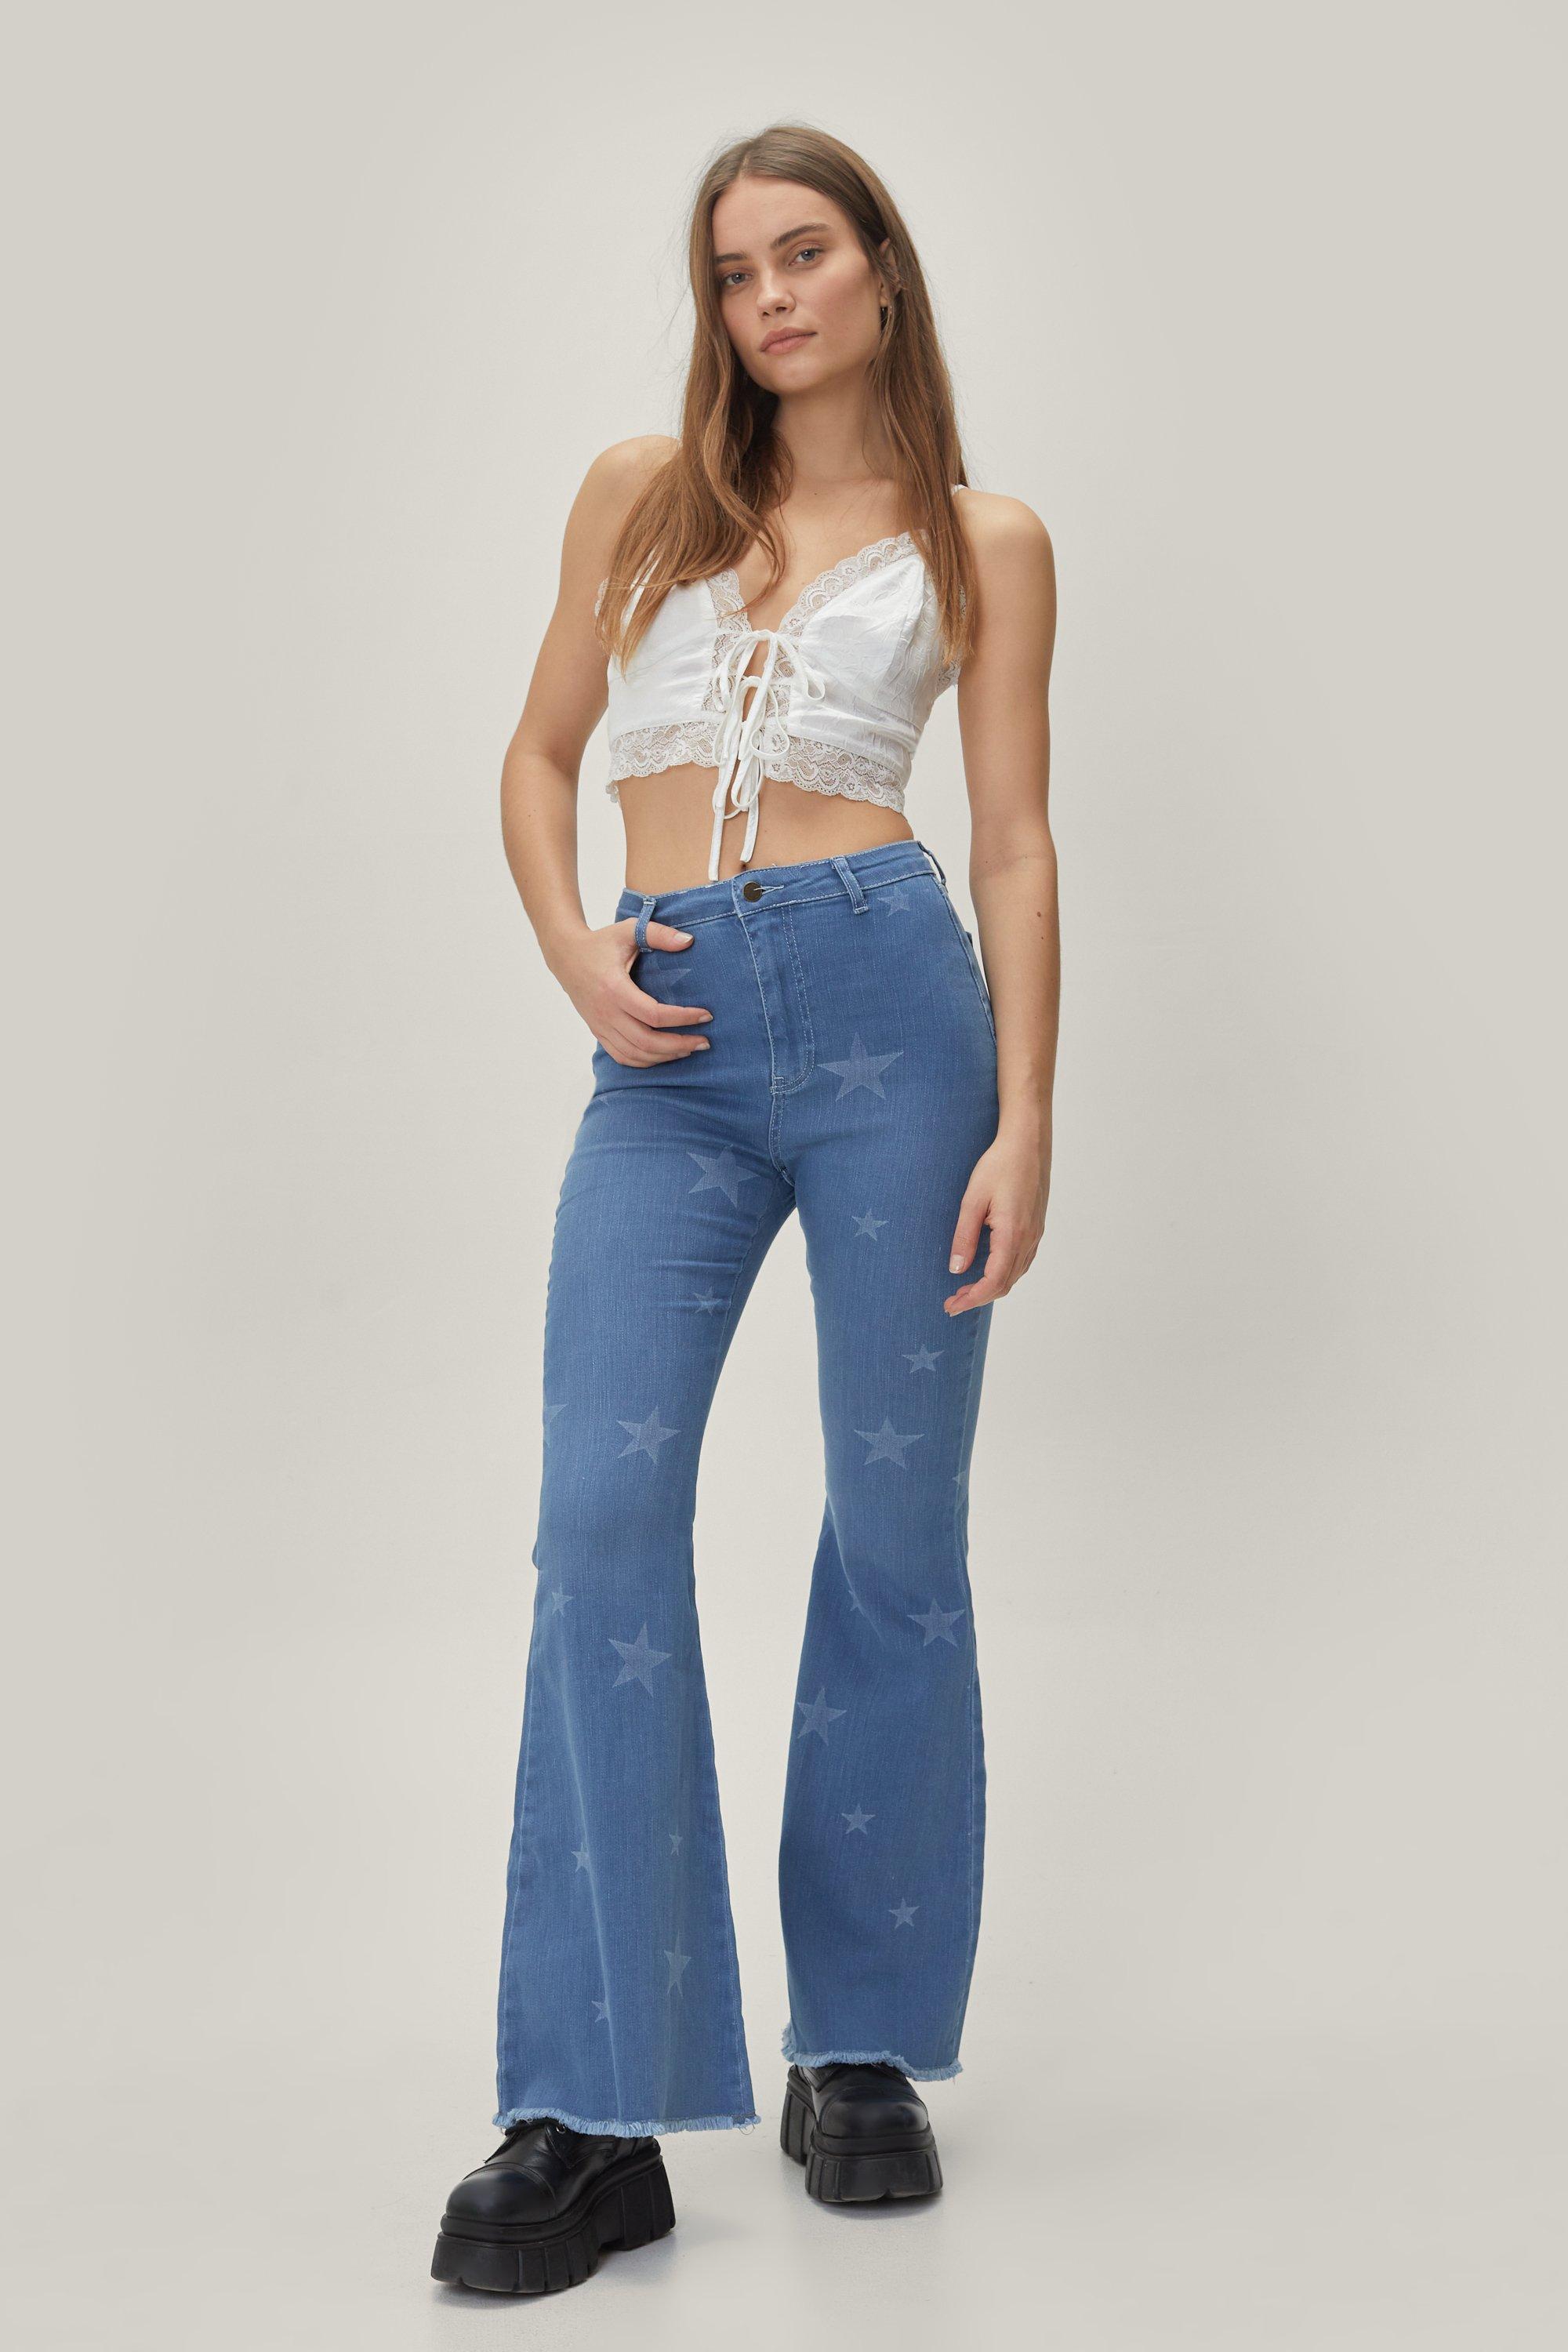 flare jeans with white stars